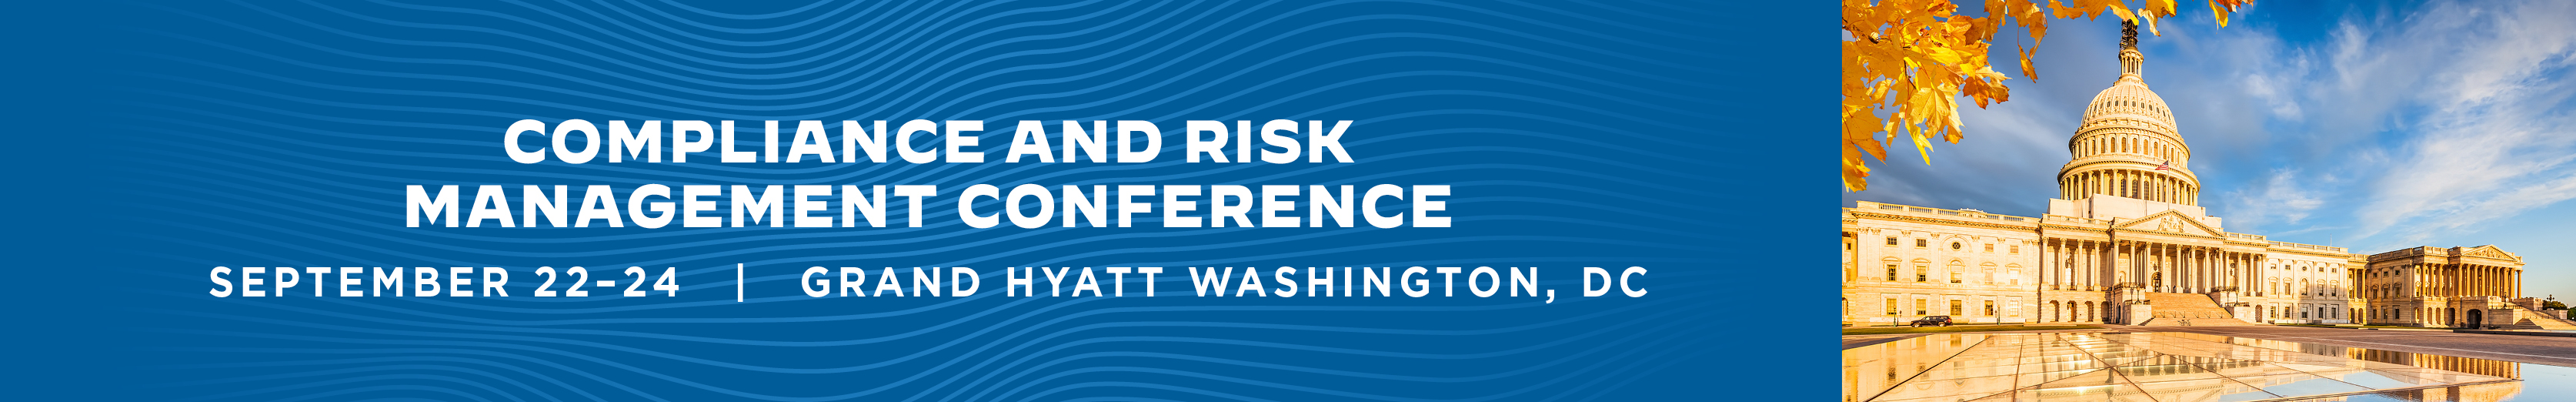 Header Graphic - MBA's Compliance and Risk Management Conference